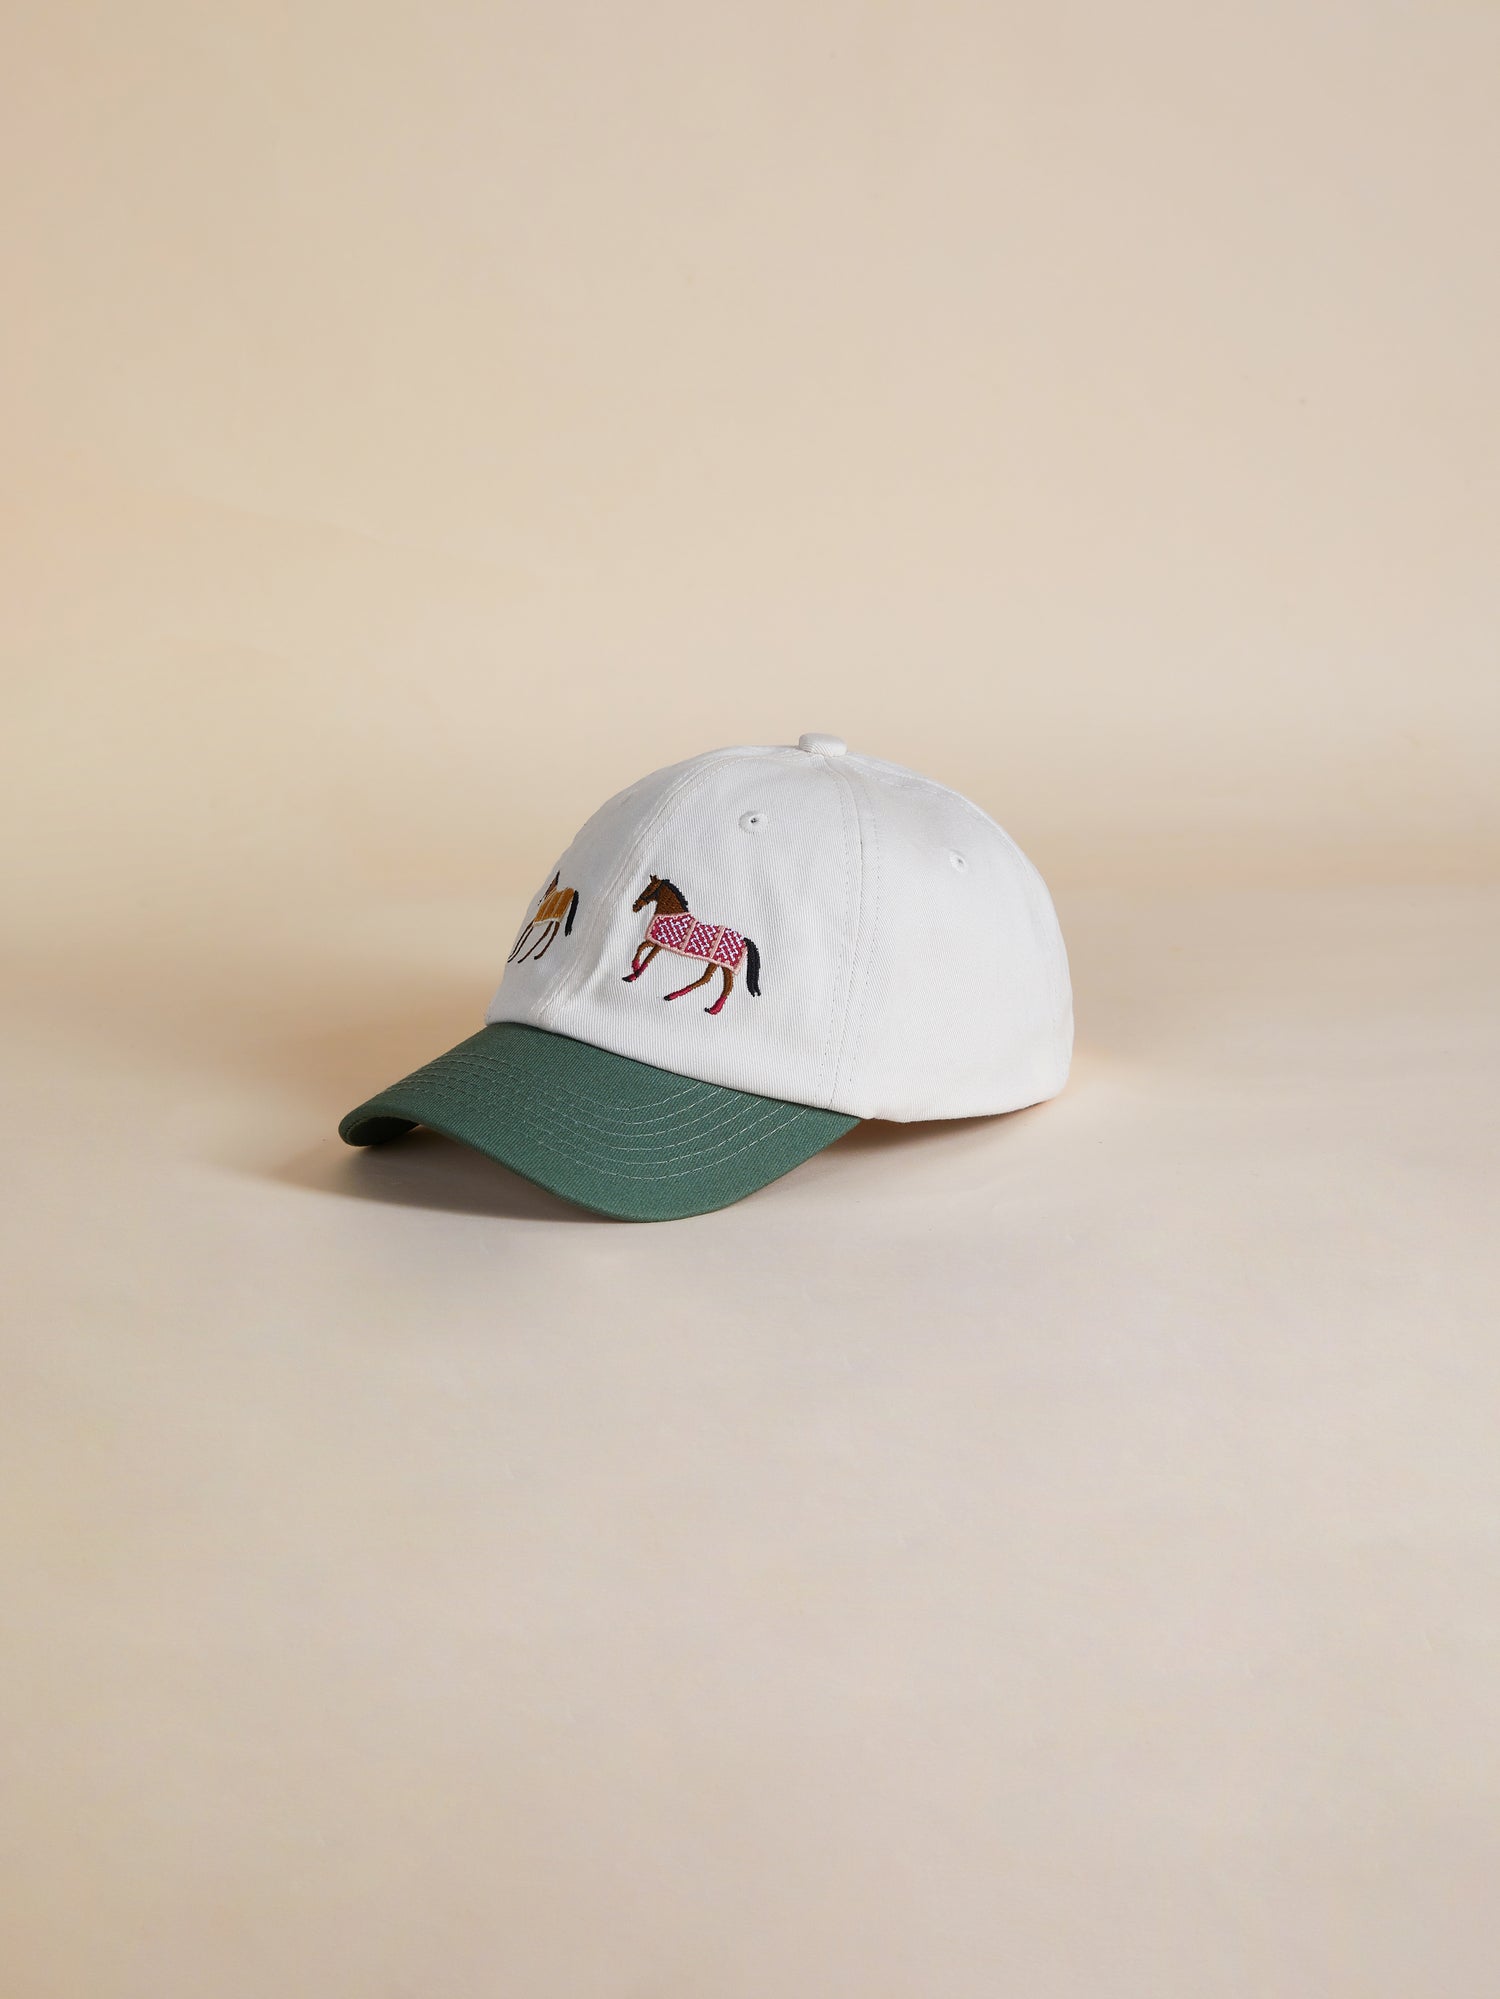 A white Horse Equine Cap with embroidered horses on it by Found.